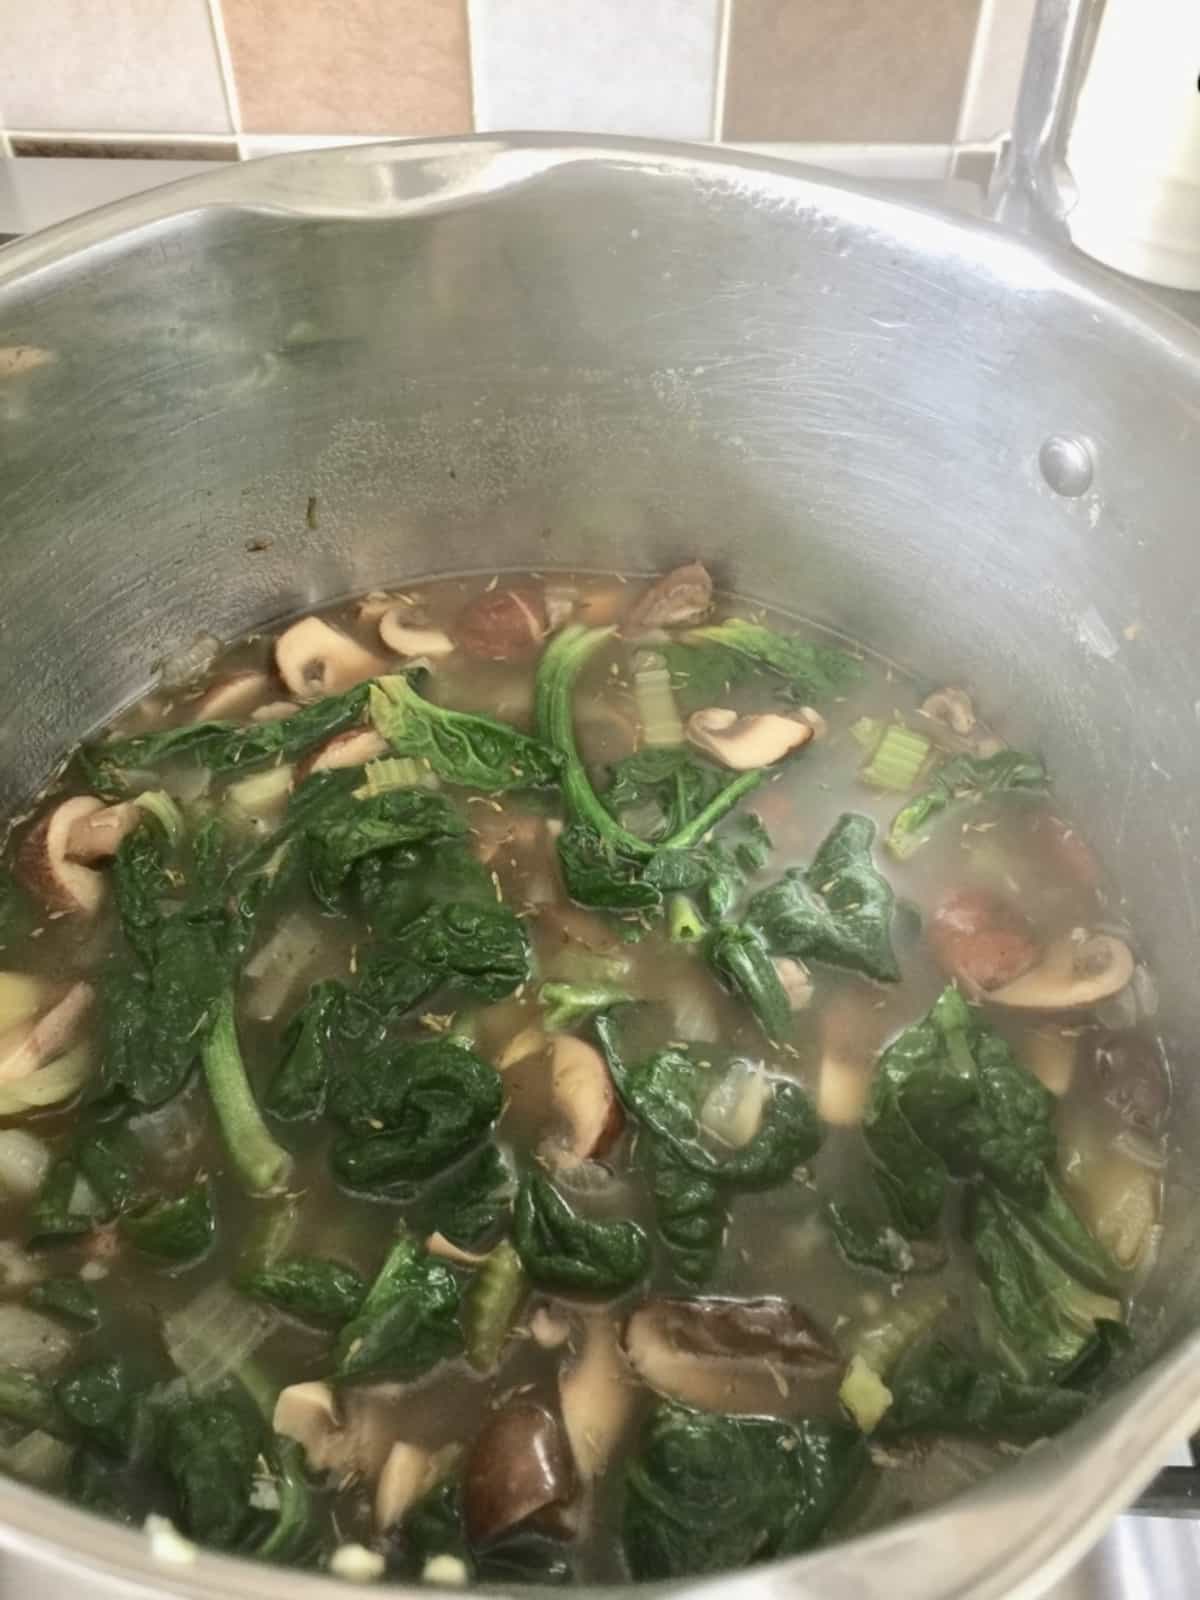 Large pot full of spinach and mushrooms in stock.